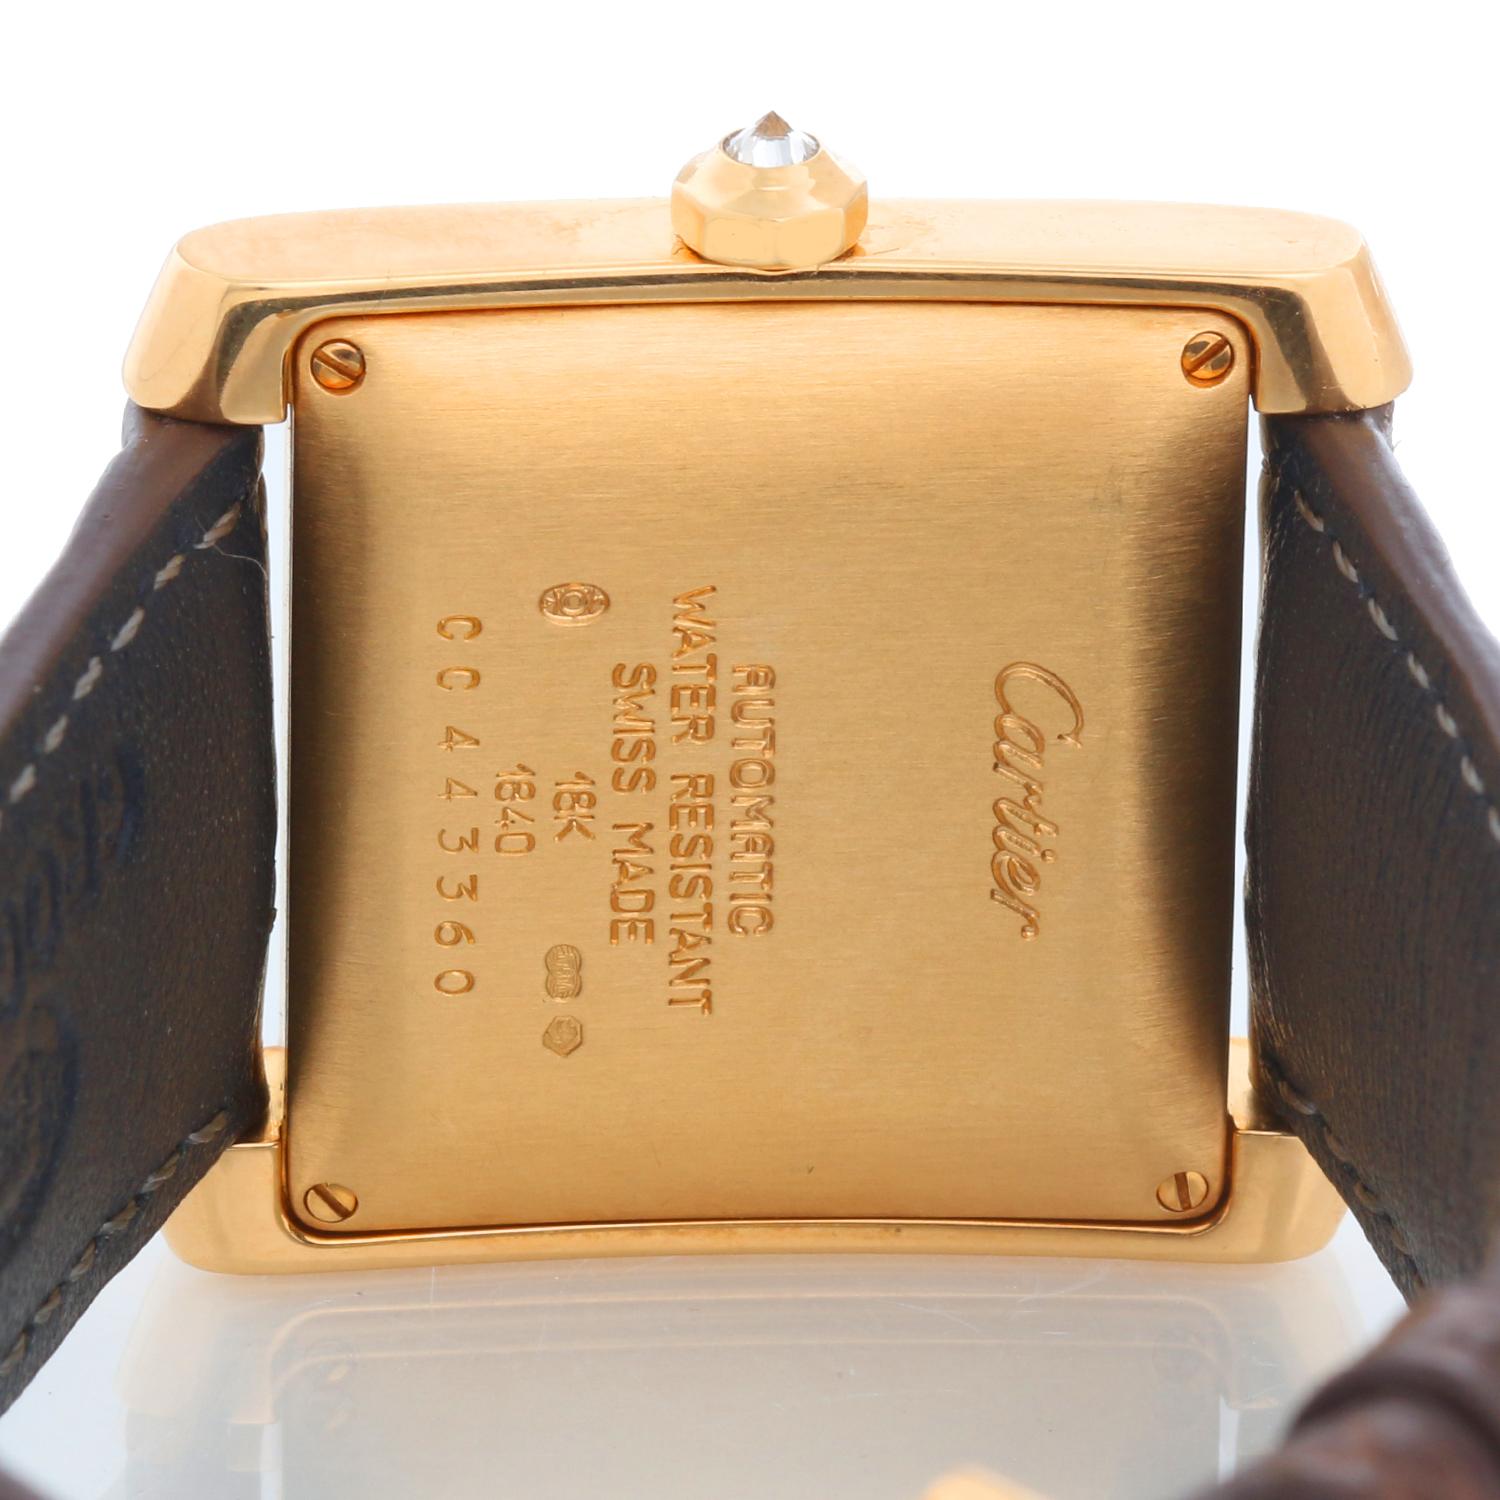 Cartier Tank Francaise 18k Yellow Gold Men's Watch WE1010R8 1840 For Sale 1